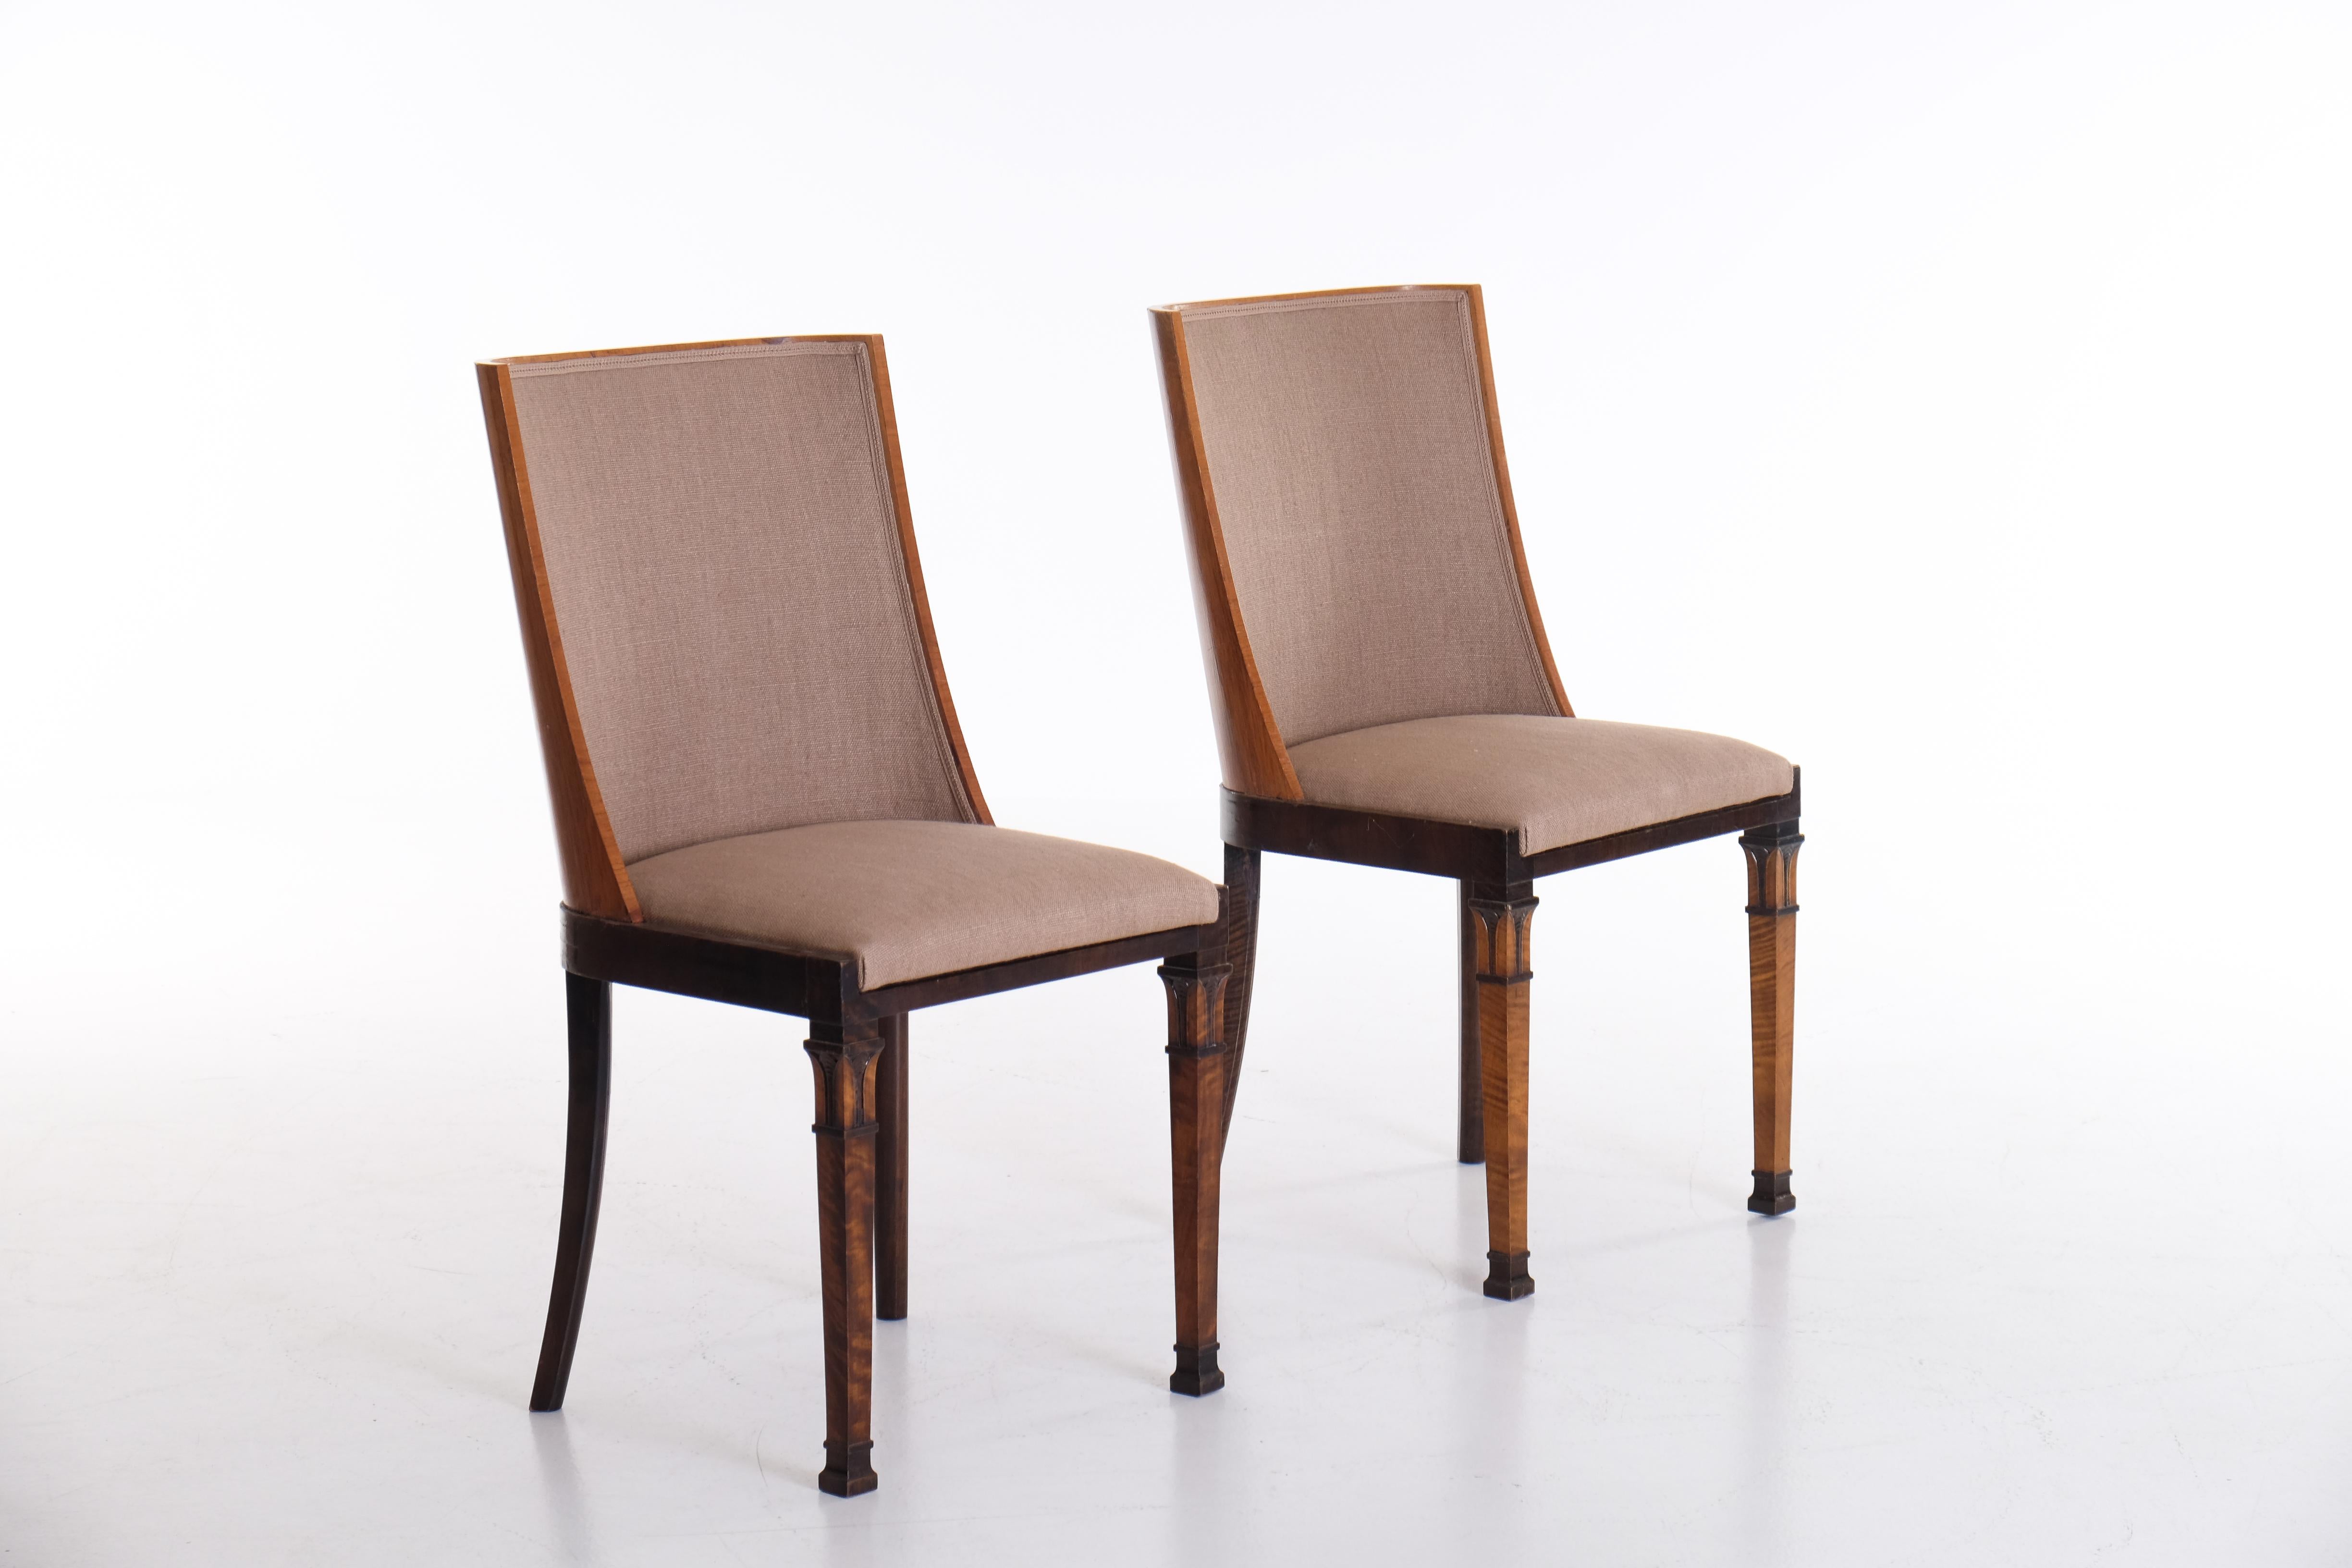 Set of 4 Chairs Attributed to Carl Bergsten, Sweden, 1920s For Sale 7